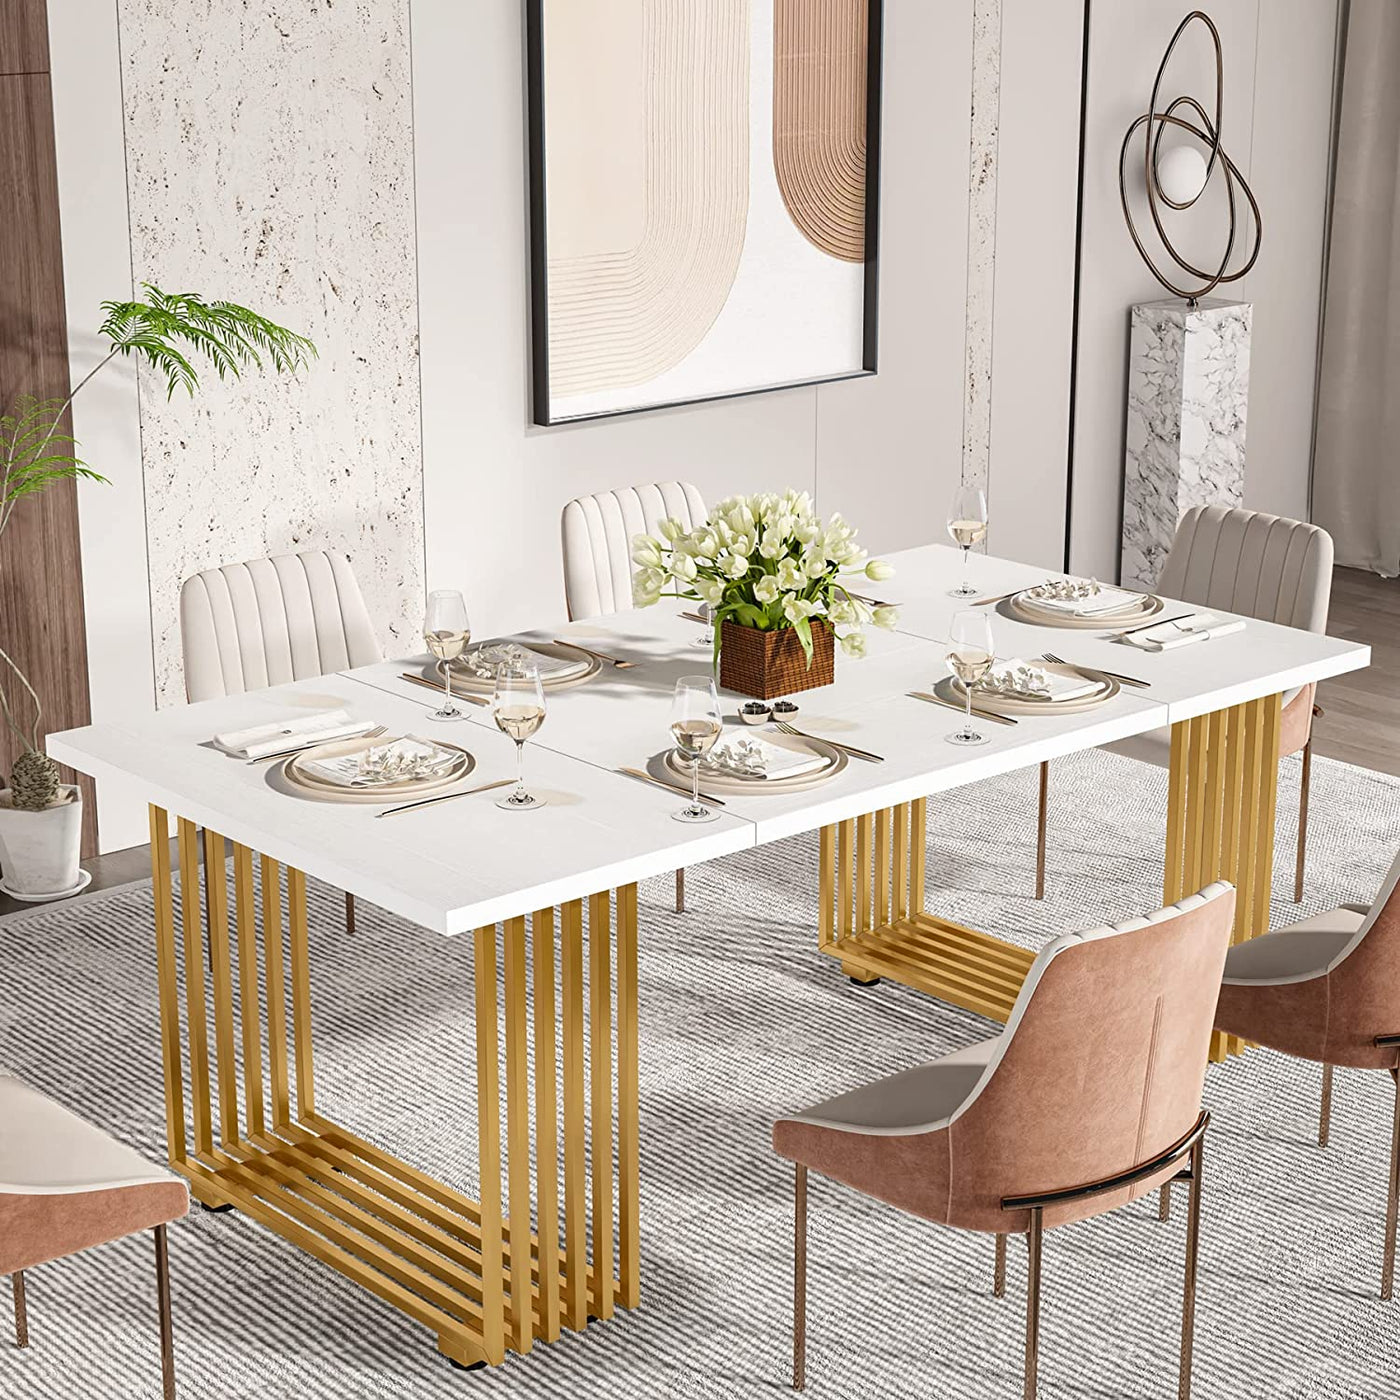 Natal Modern Dining Table | 70.8 Inches Rectangular Marble Faux Wooden Bron Kitchen Table for 6-8 People